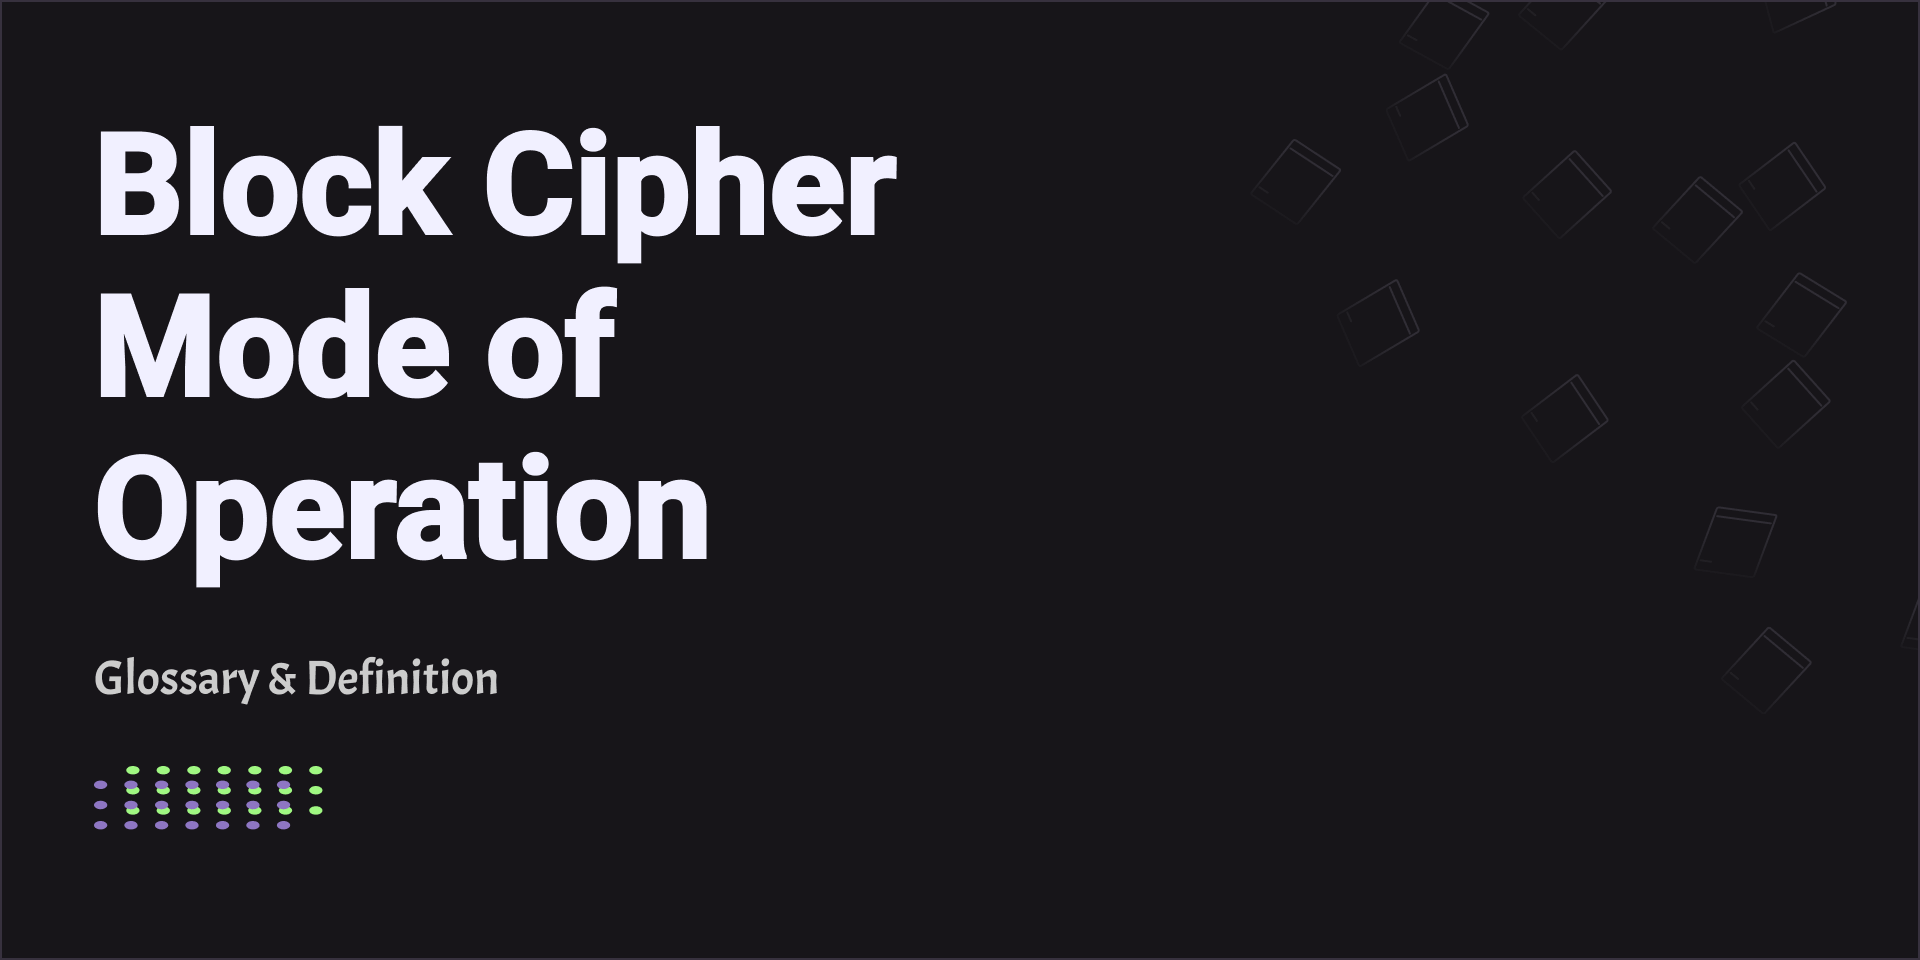 Block Cipher Mode of Operation